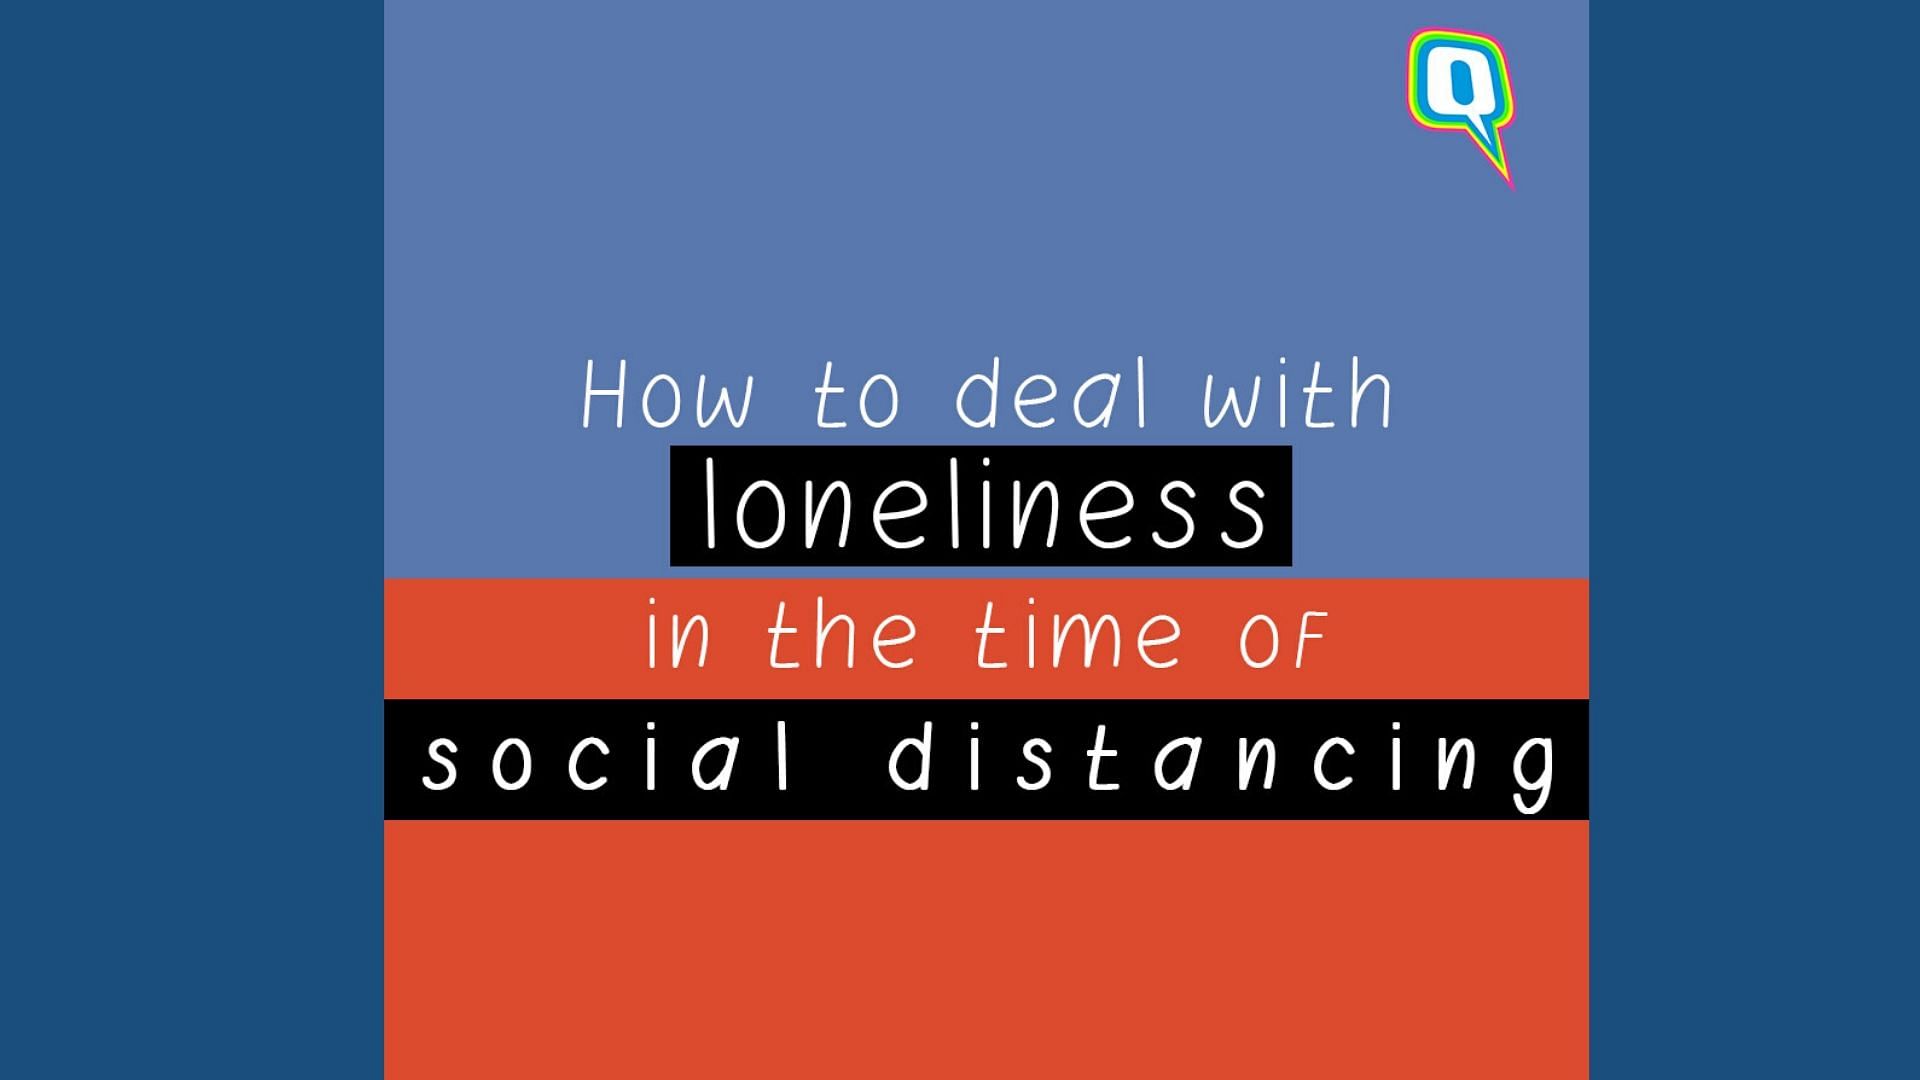 8 ways to deal with loneliness while you’re social distancing